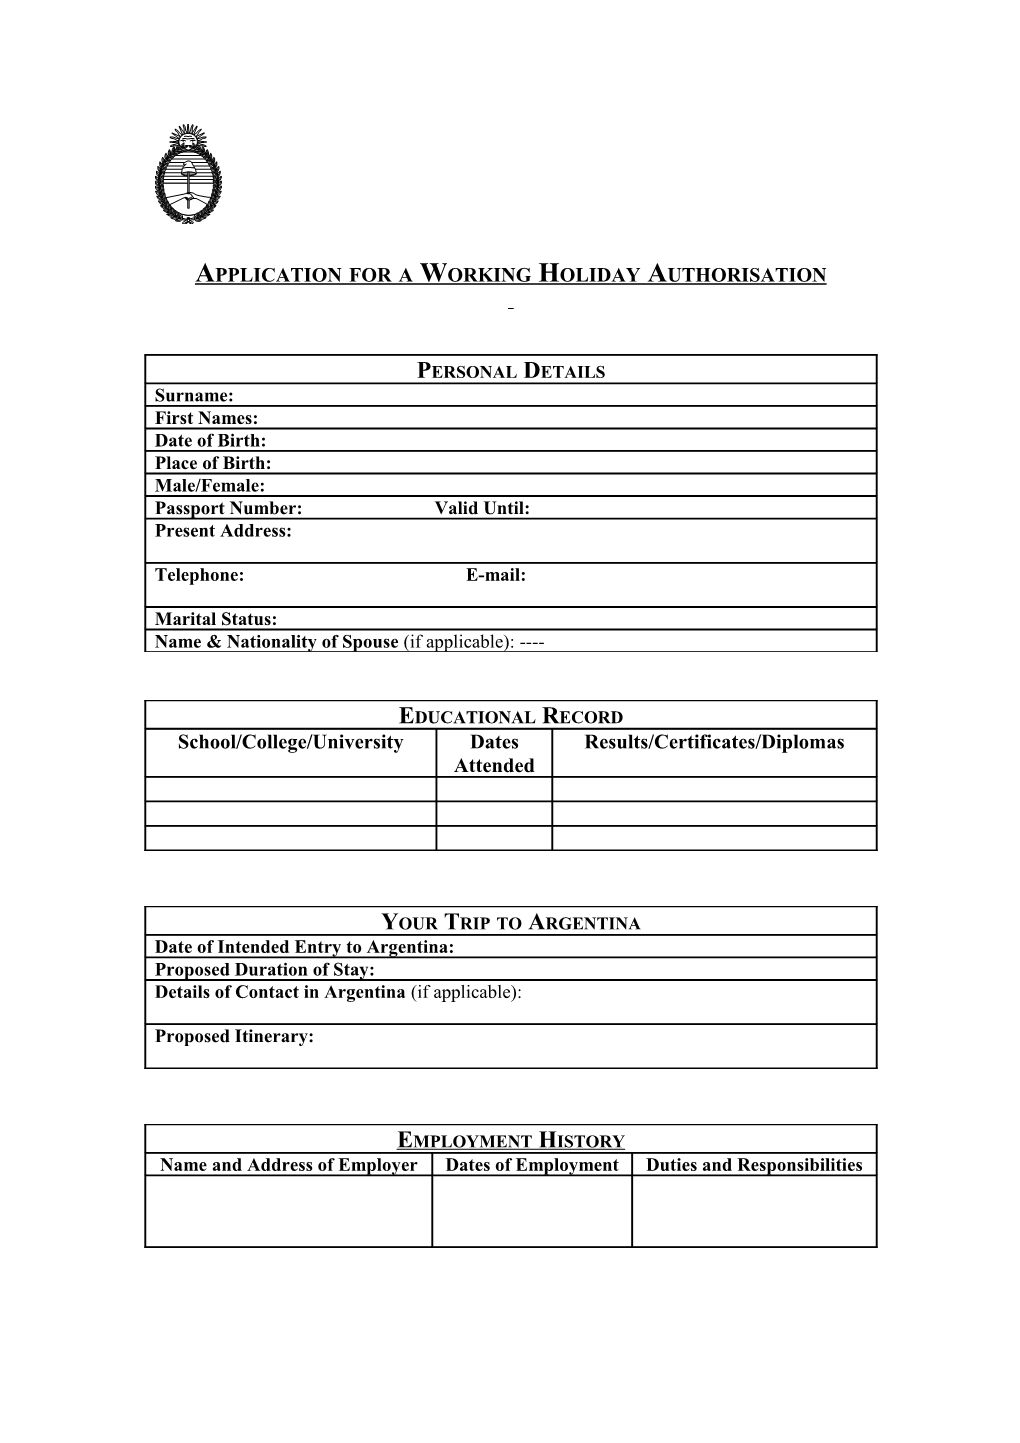 Application for a Working Holiday Authorisation